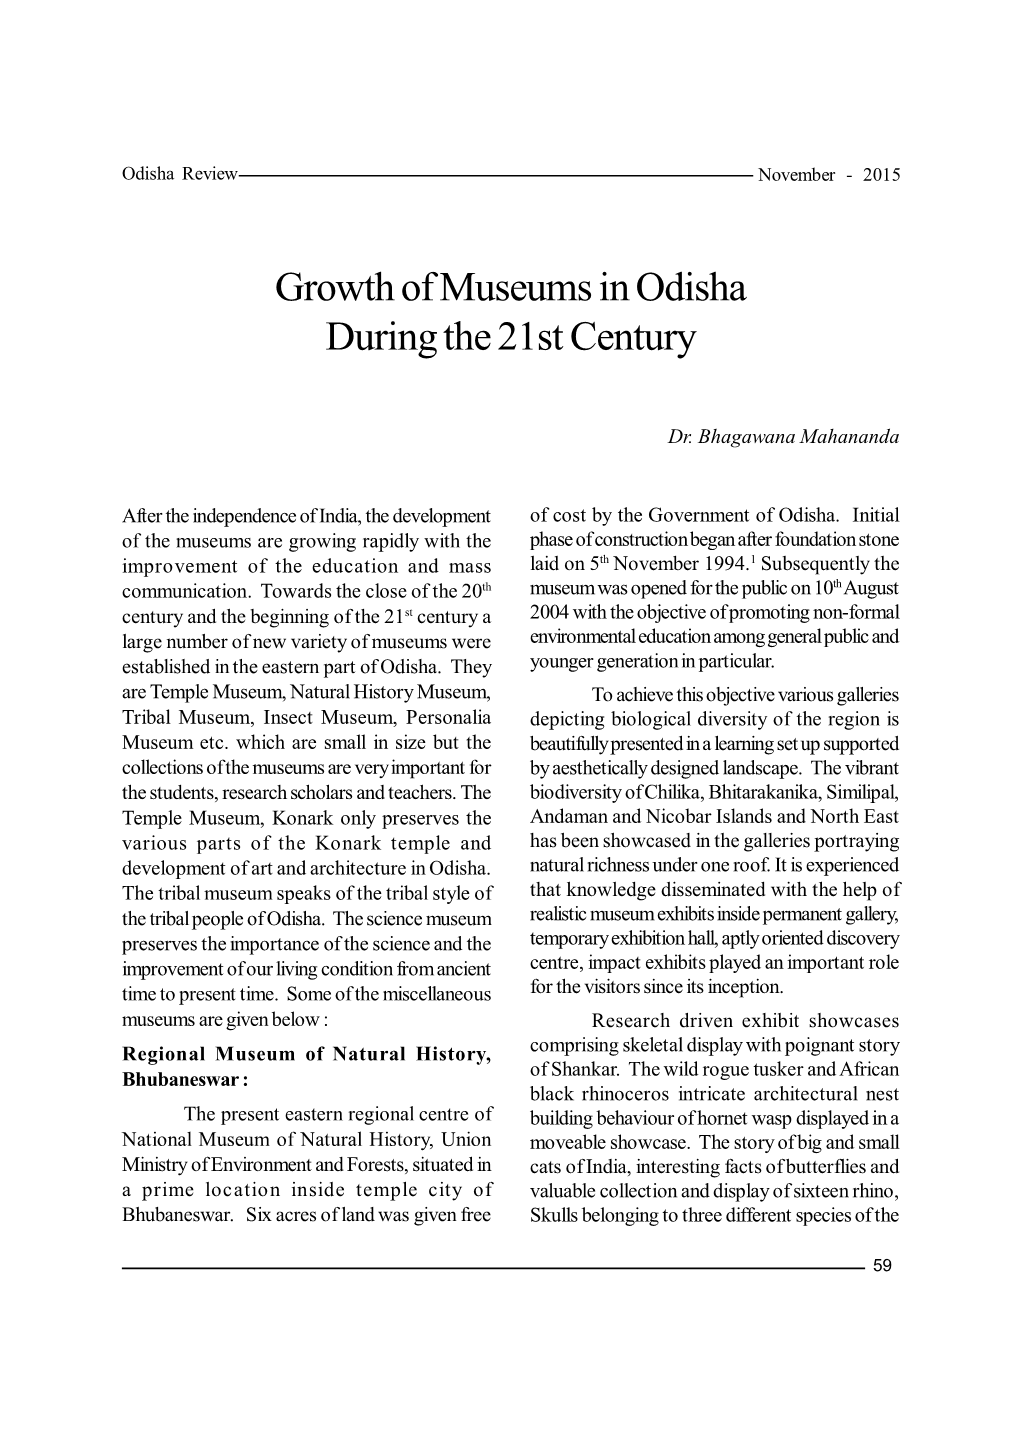 Growth of Museums in Odisha During the 21St Century